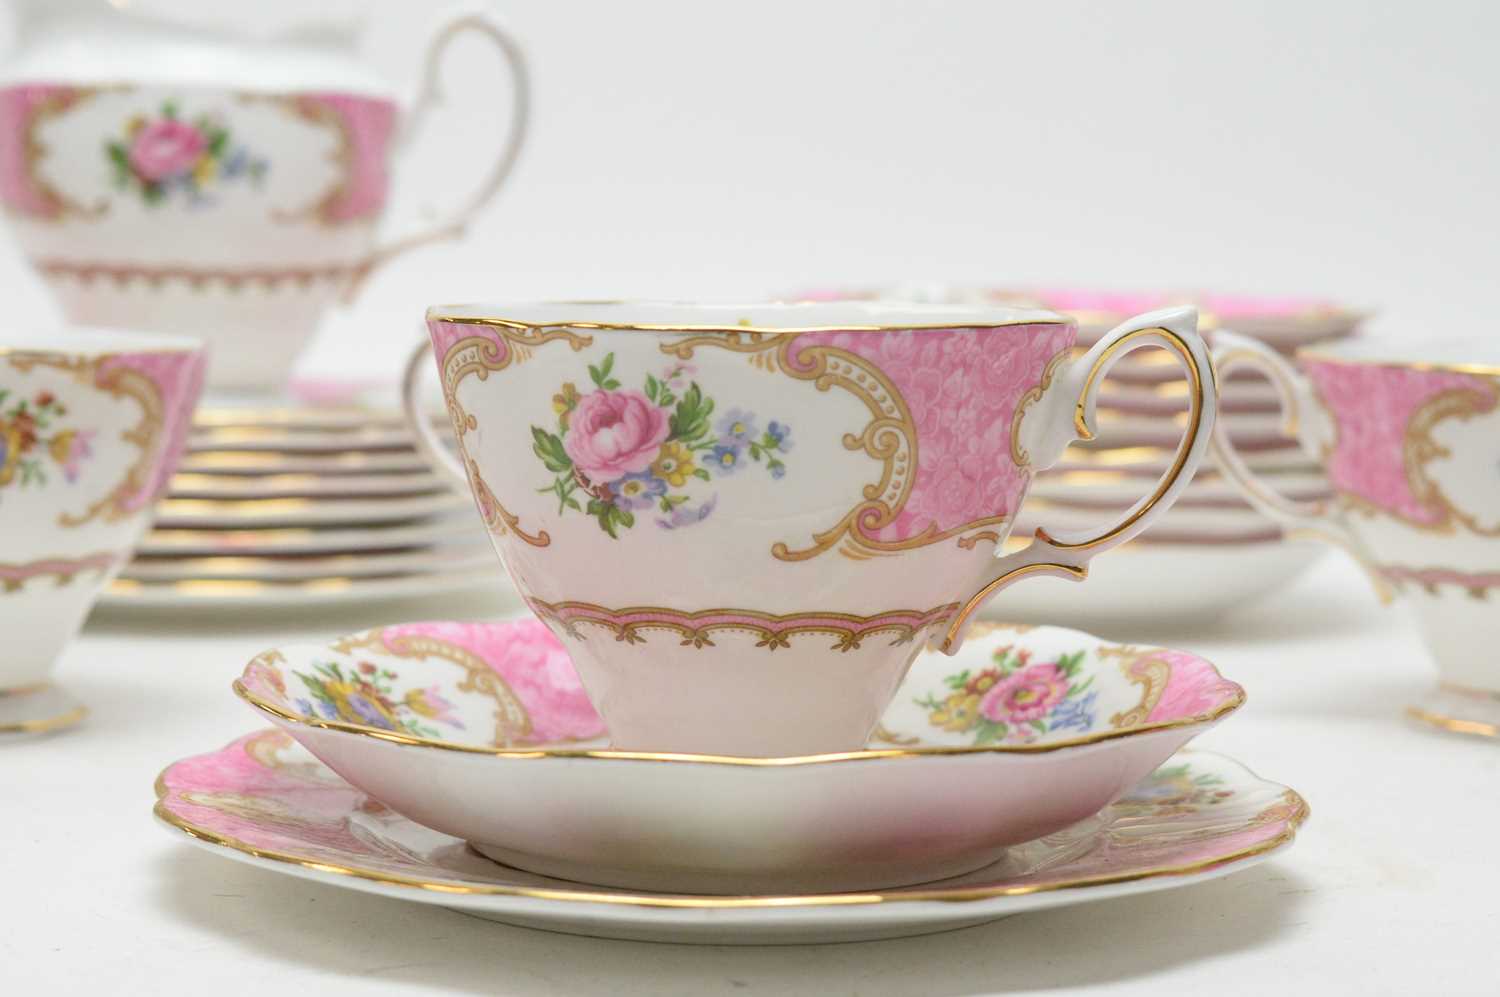 Royal Albert ‘Lady Carlyle’ floral decorated tea service - Image 2 of 4